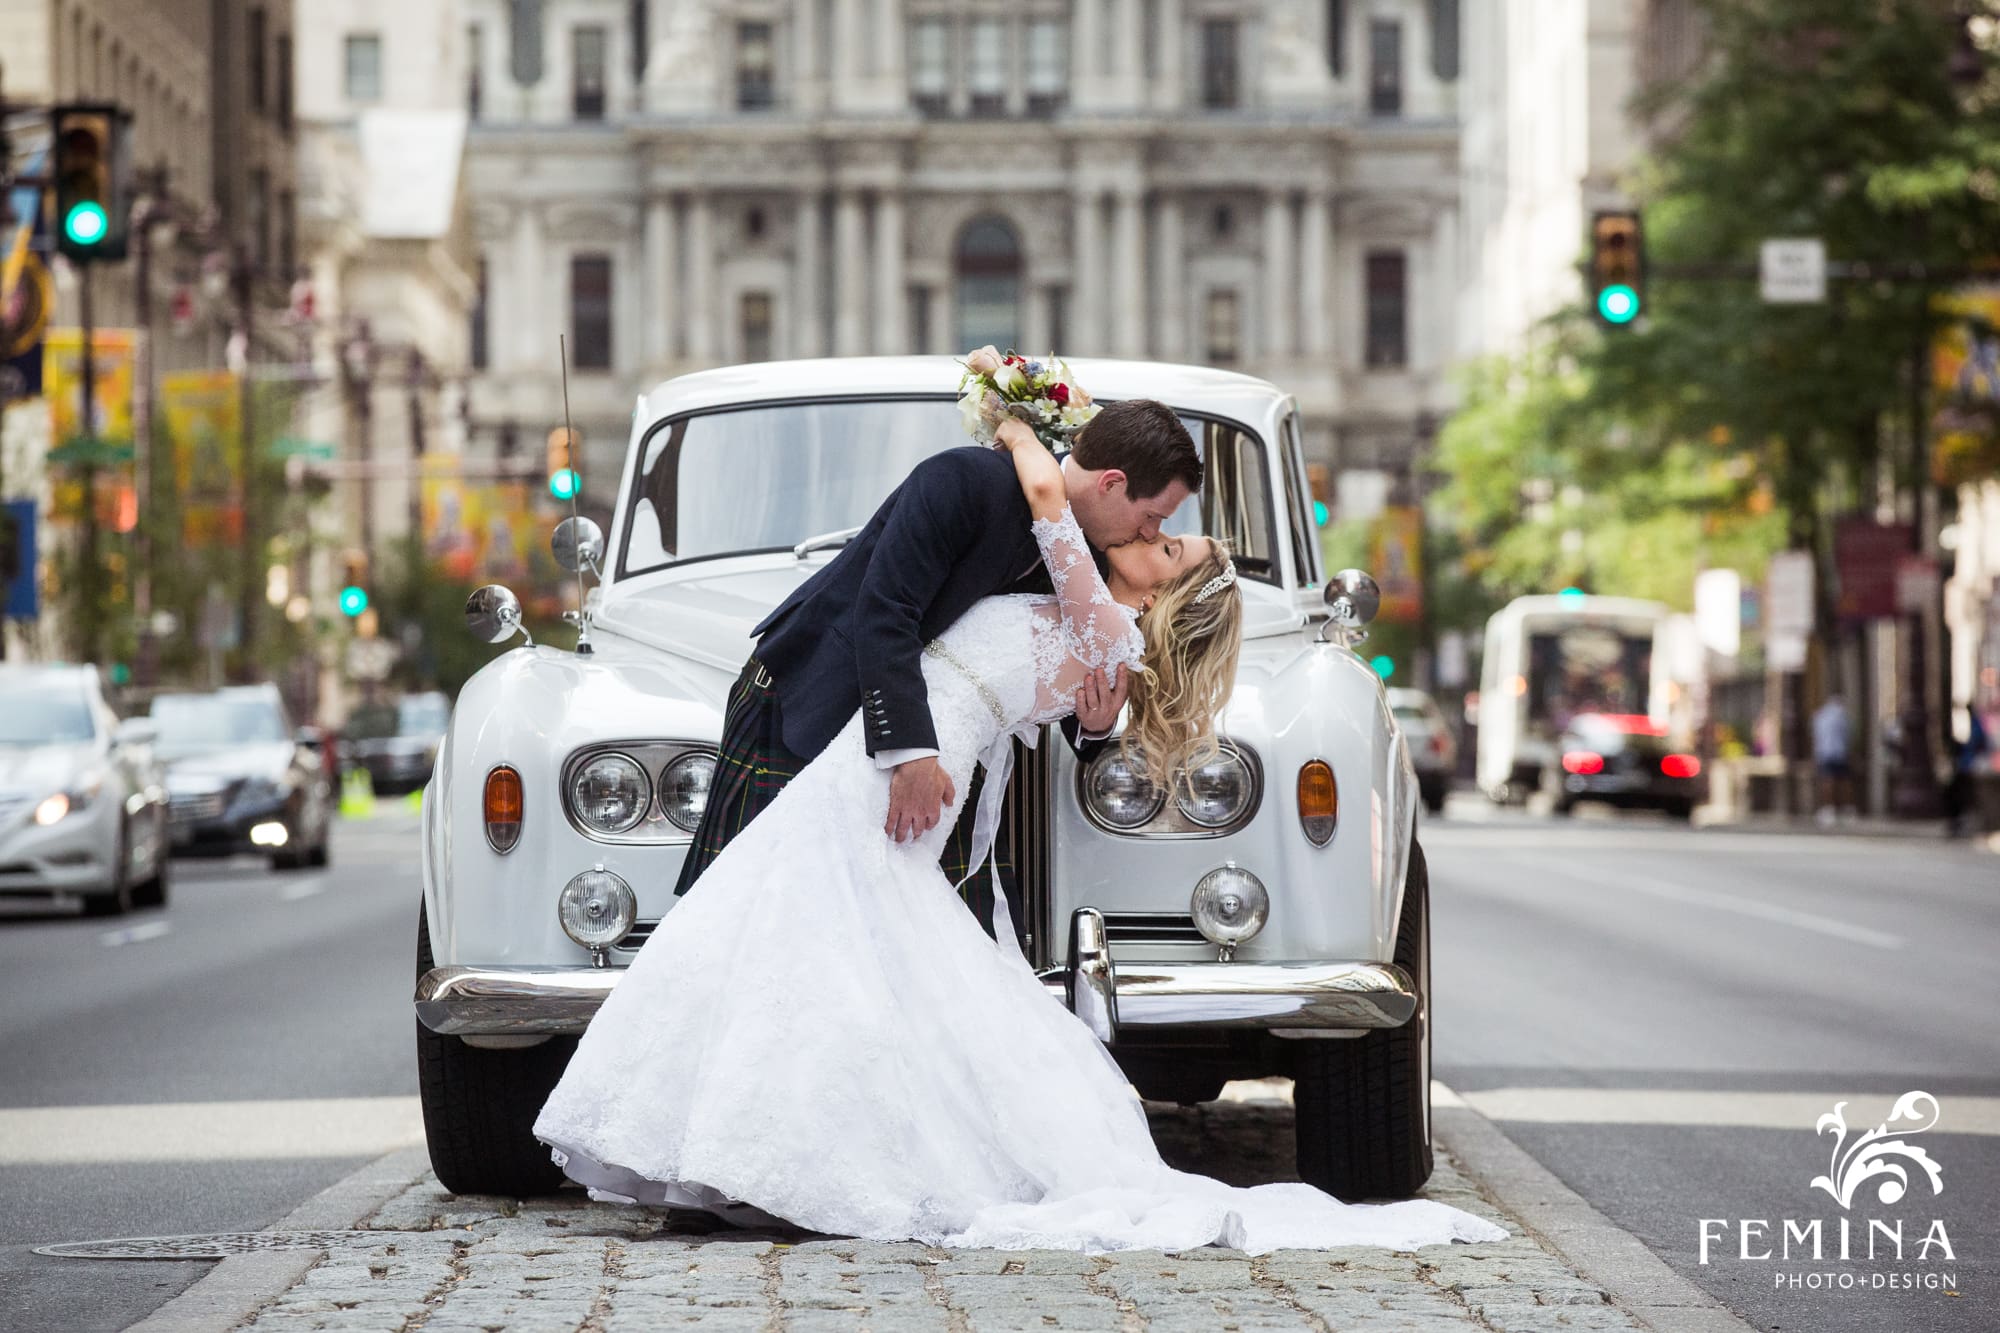 Lyall dips his bride Rebecca in front of City Hall on Broad St in Philadelphia